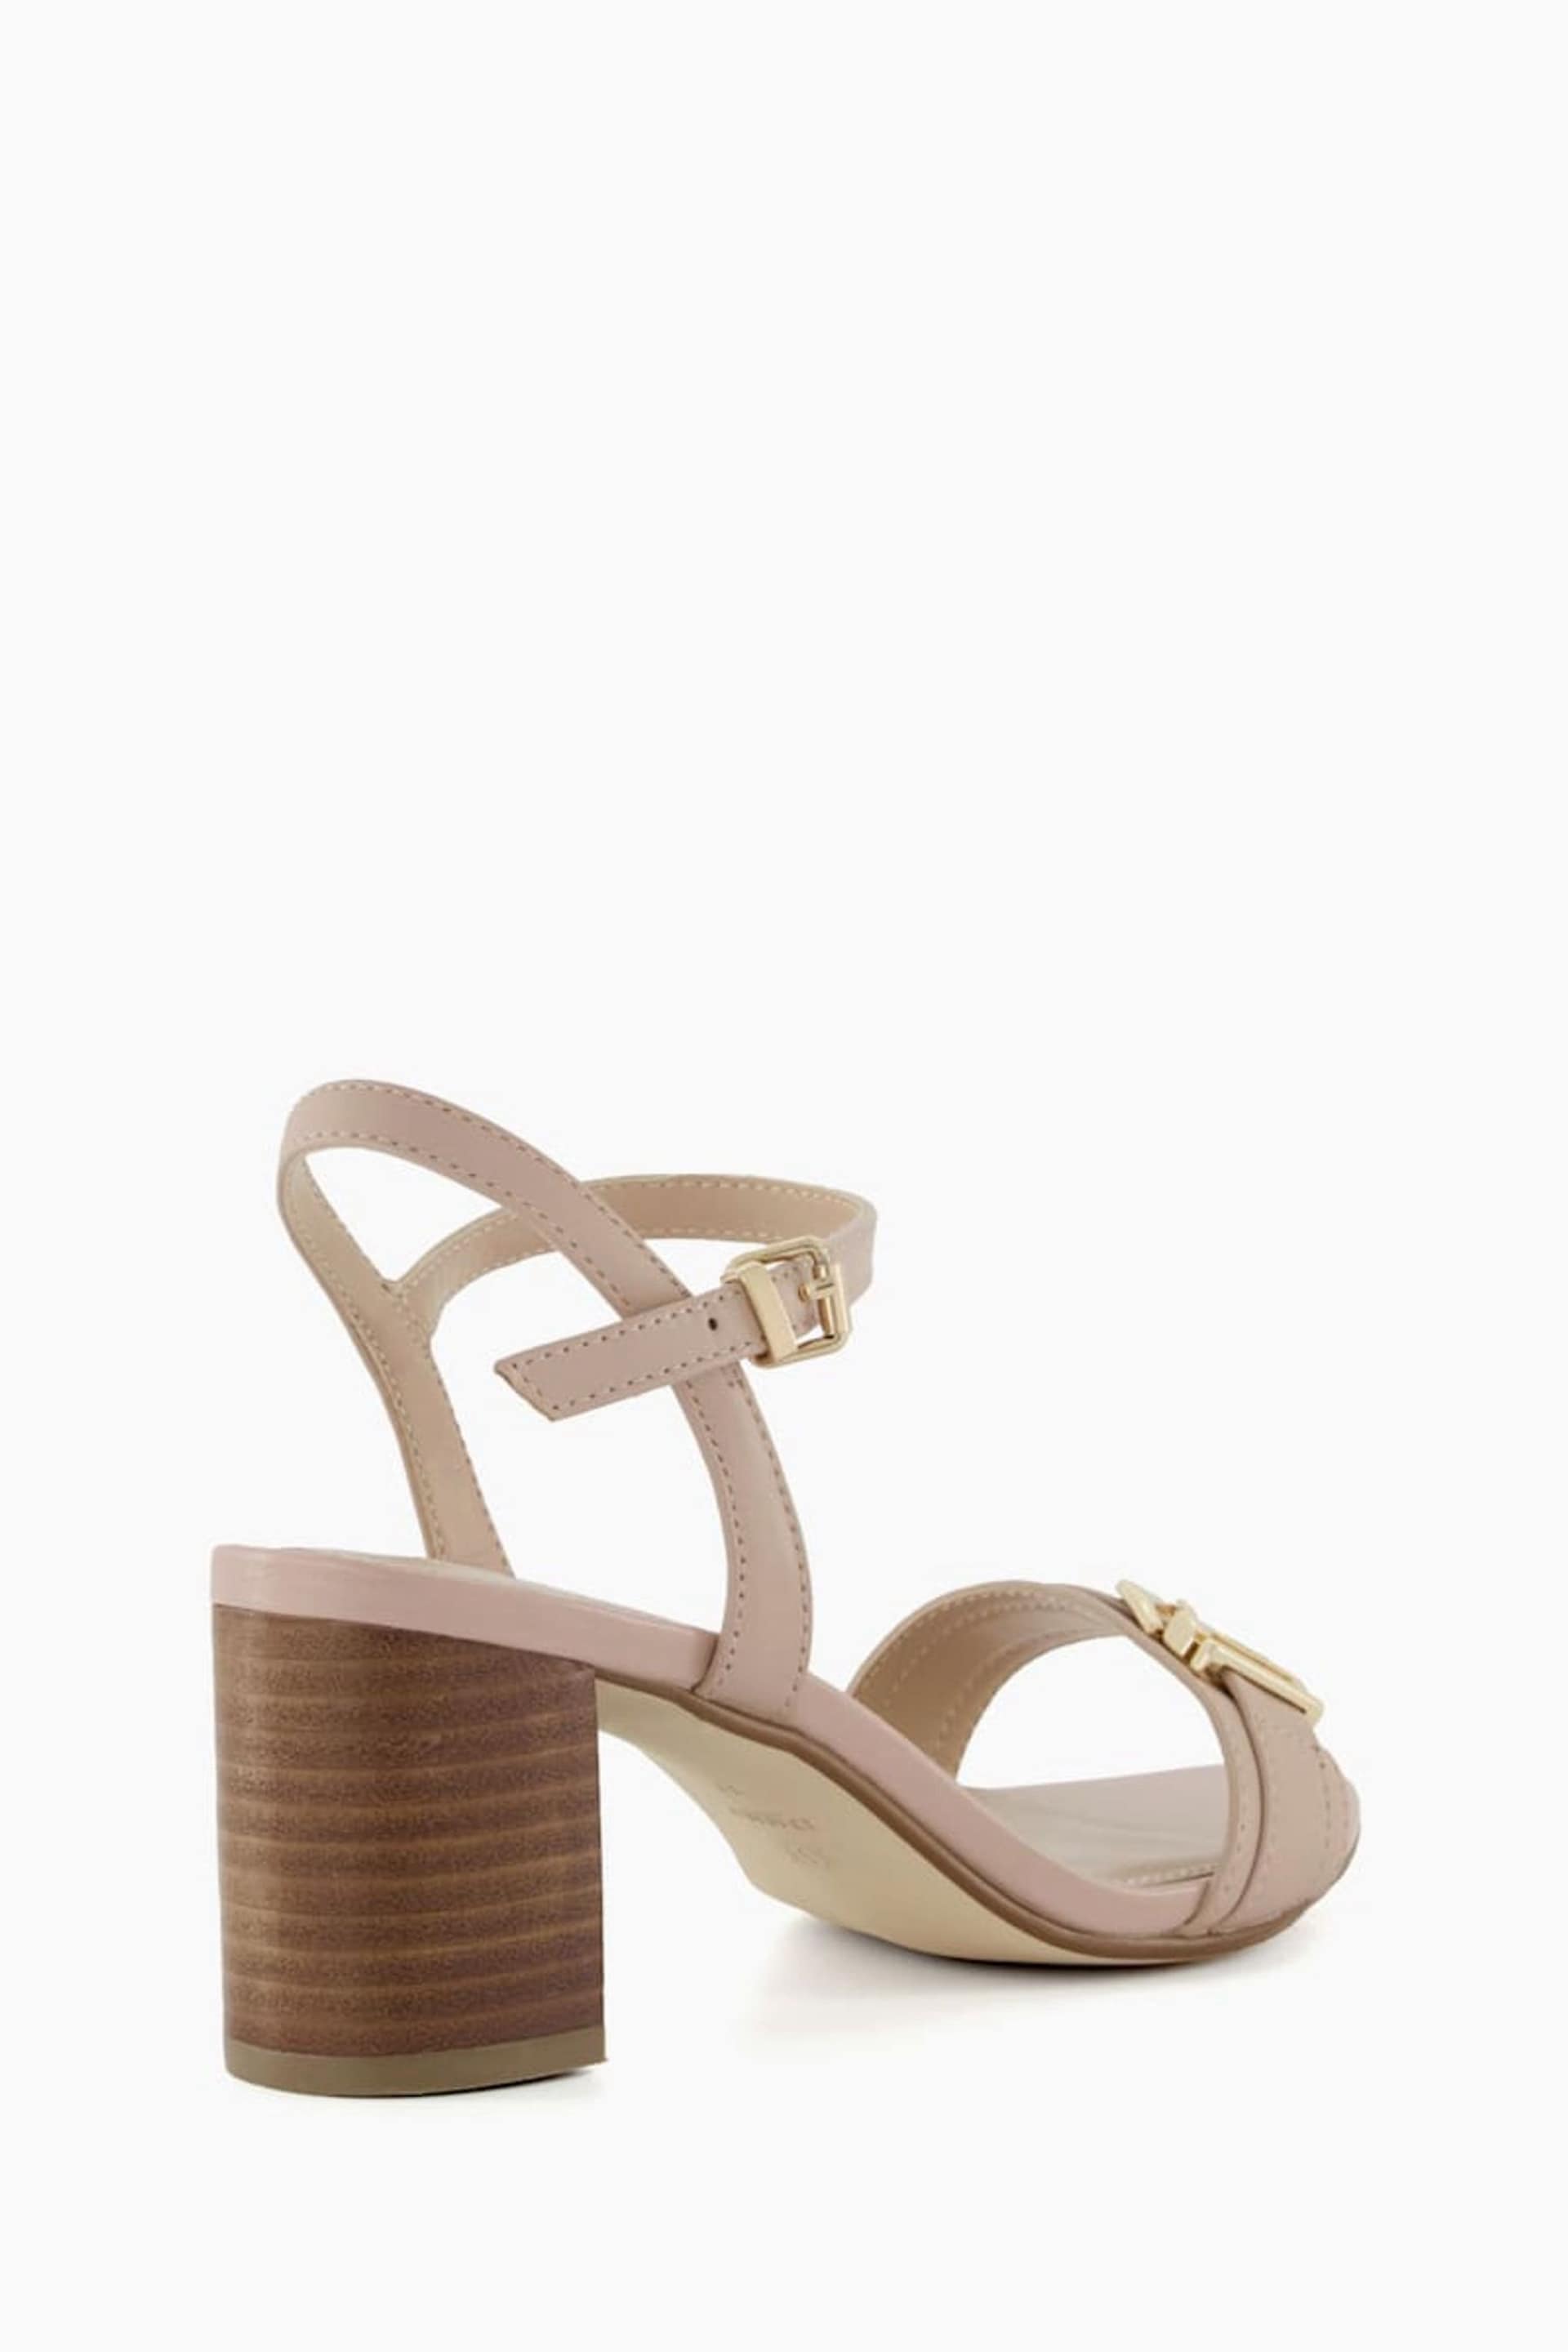 Dune London Pink Wide Fit Jessie Branded Buckle Heeled  Sandals - Image 5 of 6